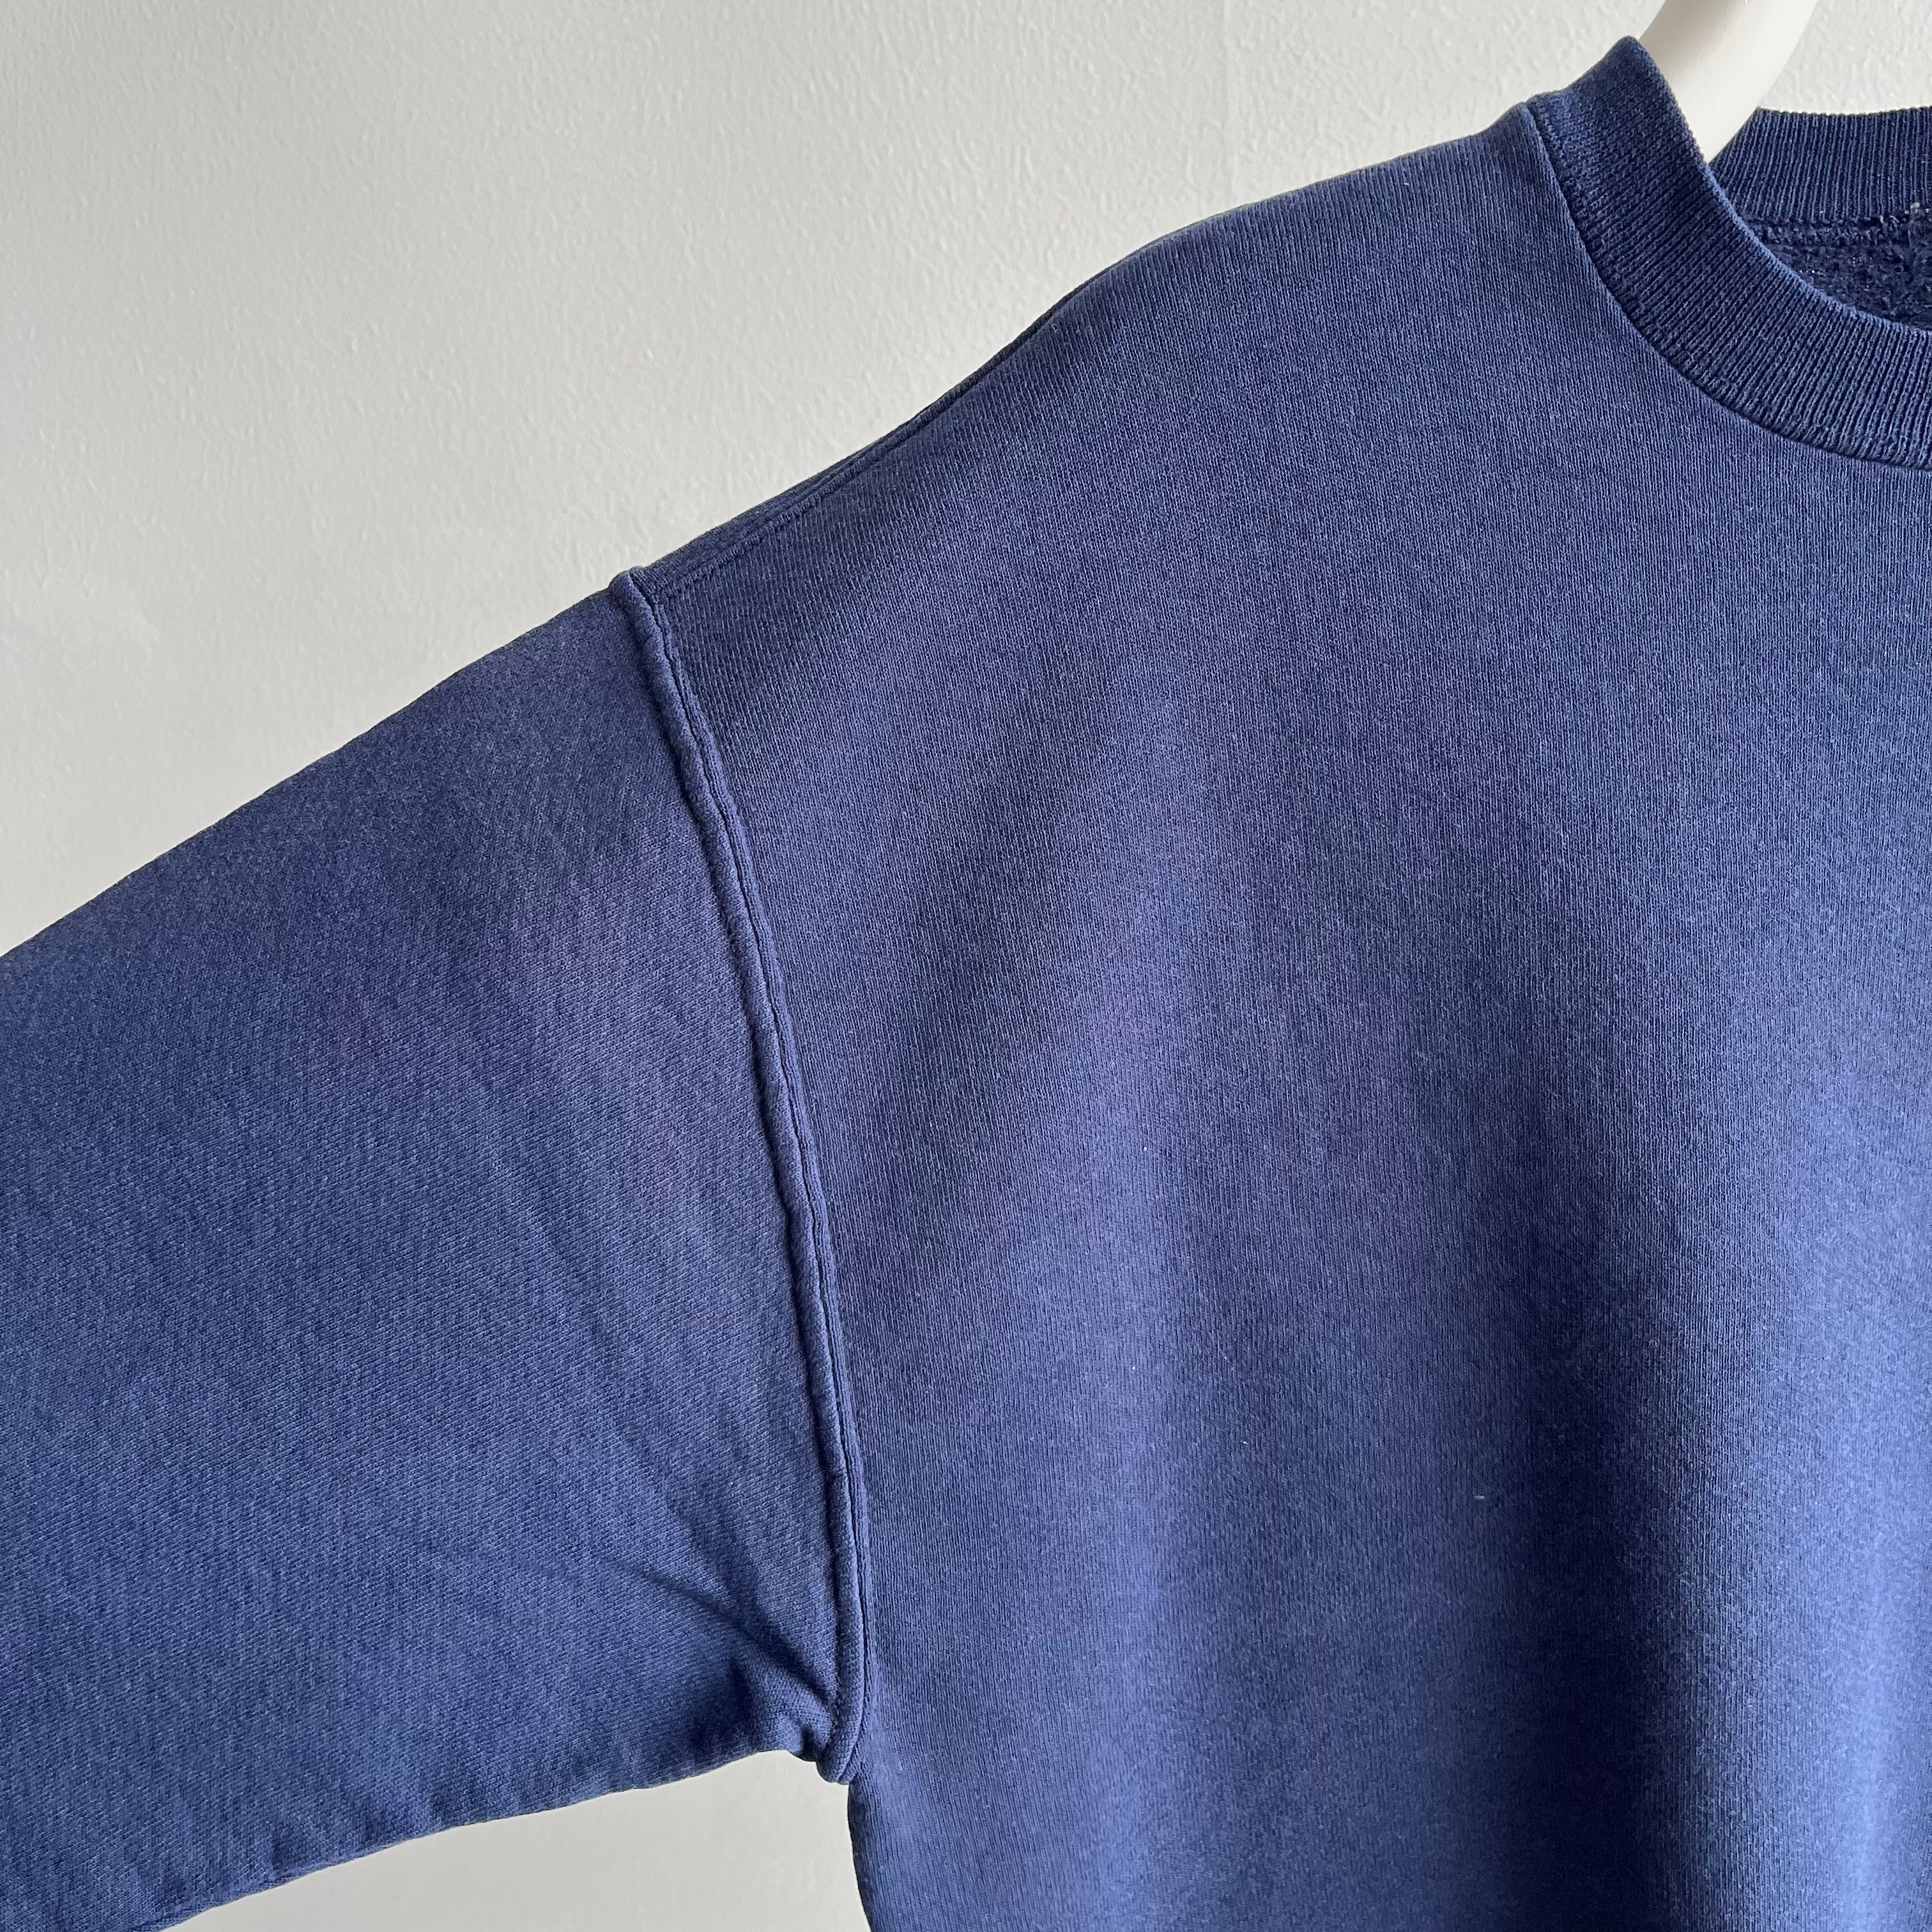 1990s BEAUTIFUL Slouchy Thinned Out Delightful Navy Sweatshirt